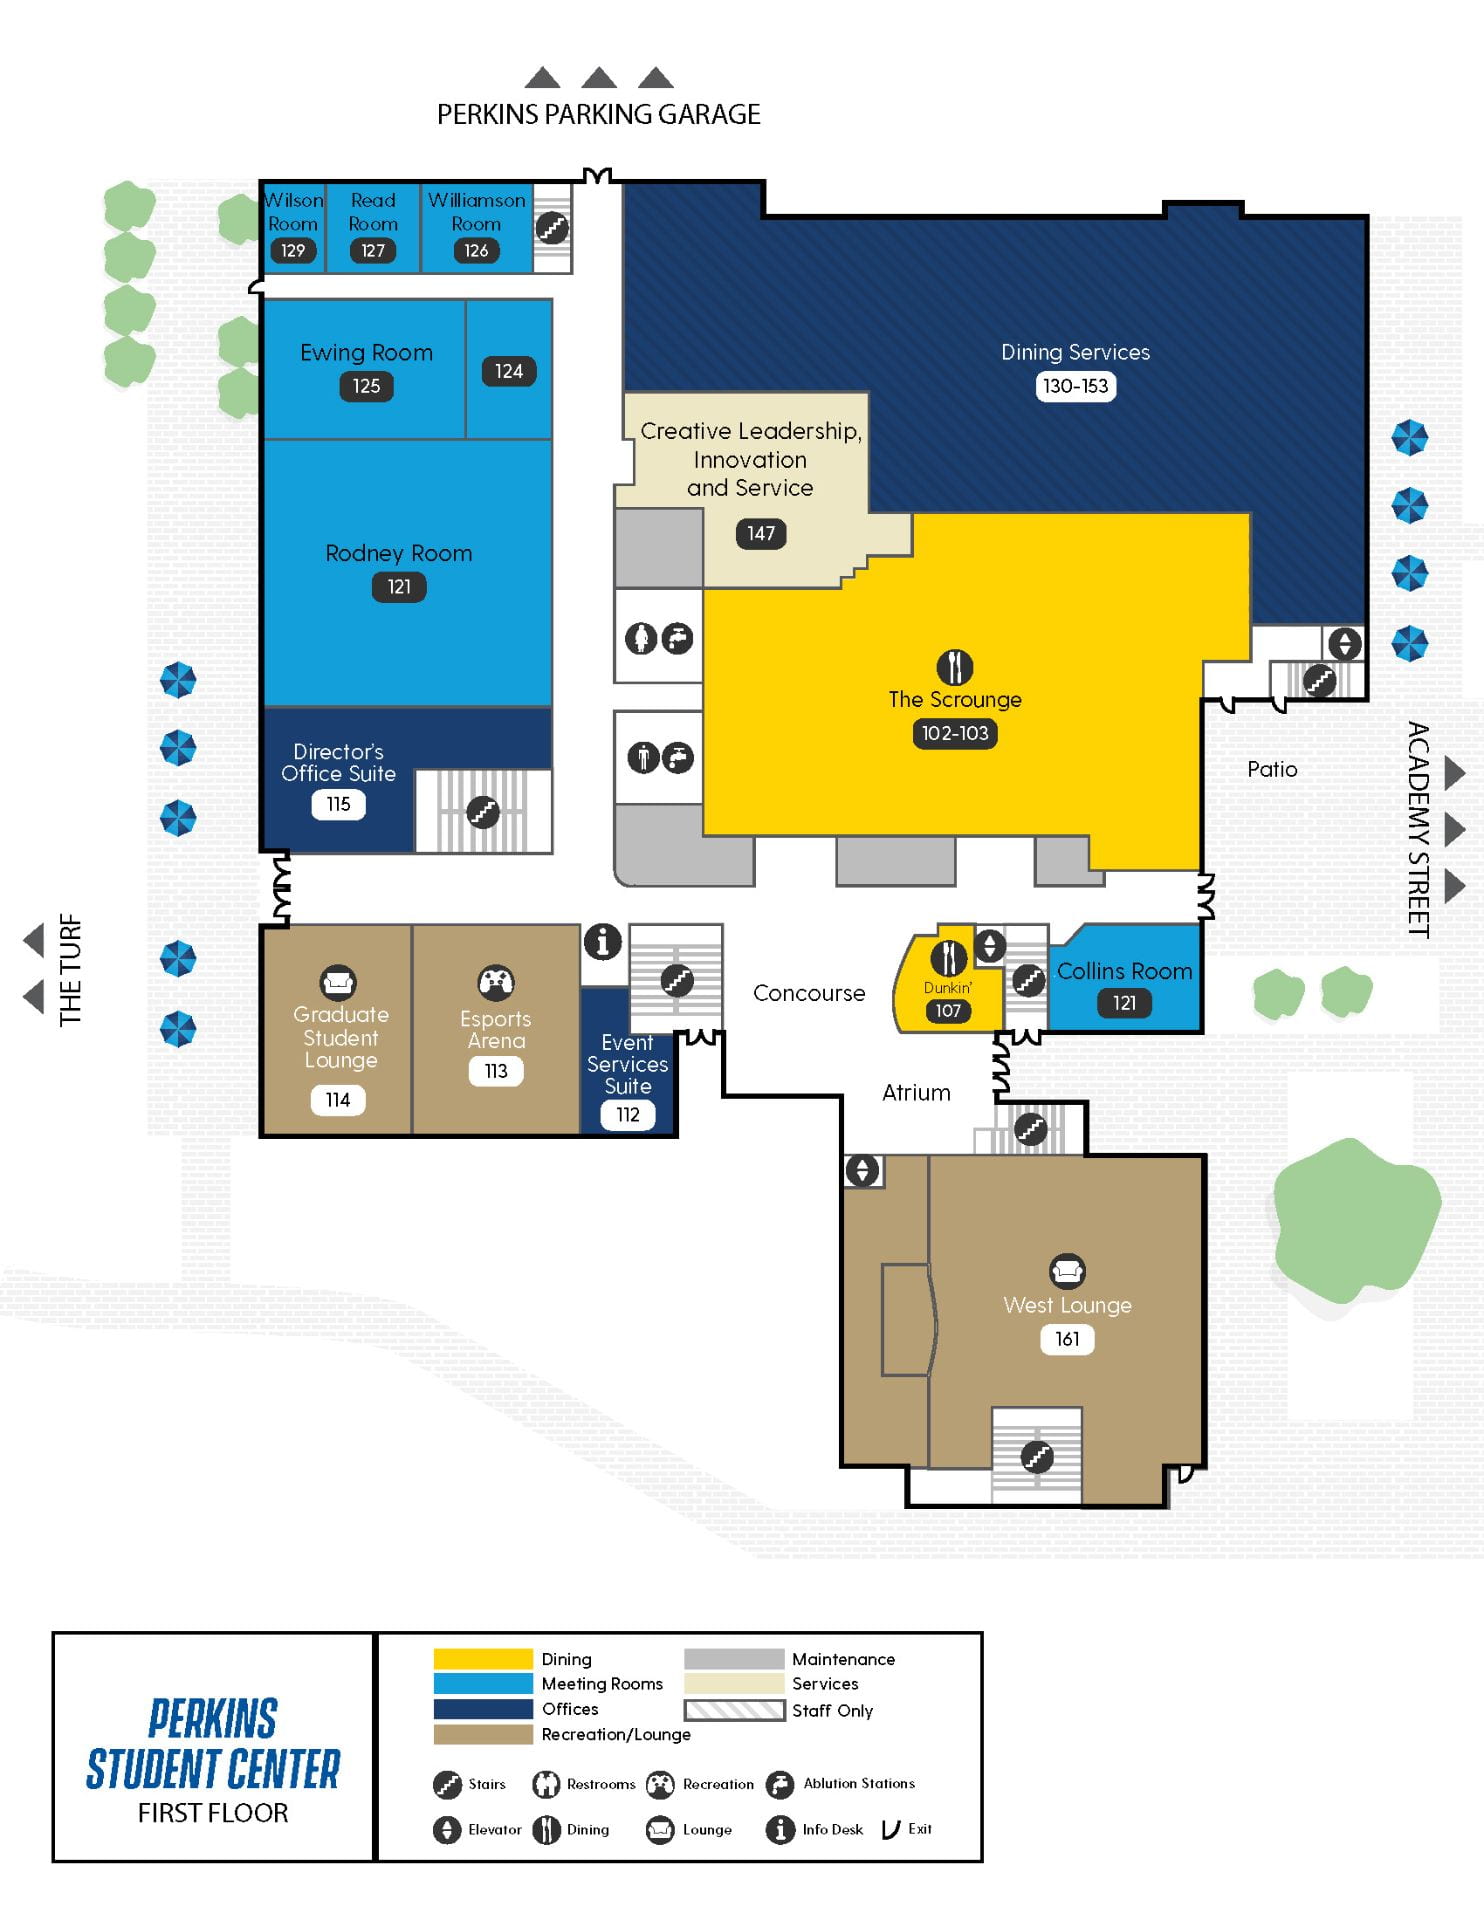 Perkins First Floor Map, showing The Scrounge, The Den by Dennys, Dunkin', Graduate and West Lounge, Esports Arena, Event Services Office, and several reservable meeting rooms